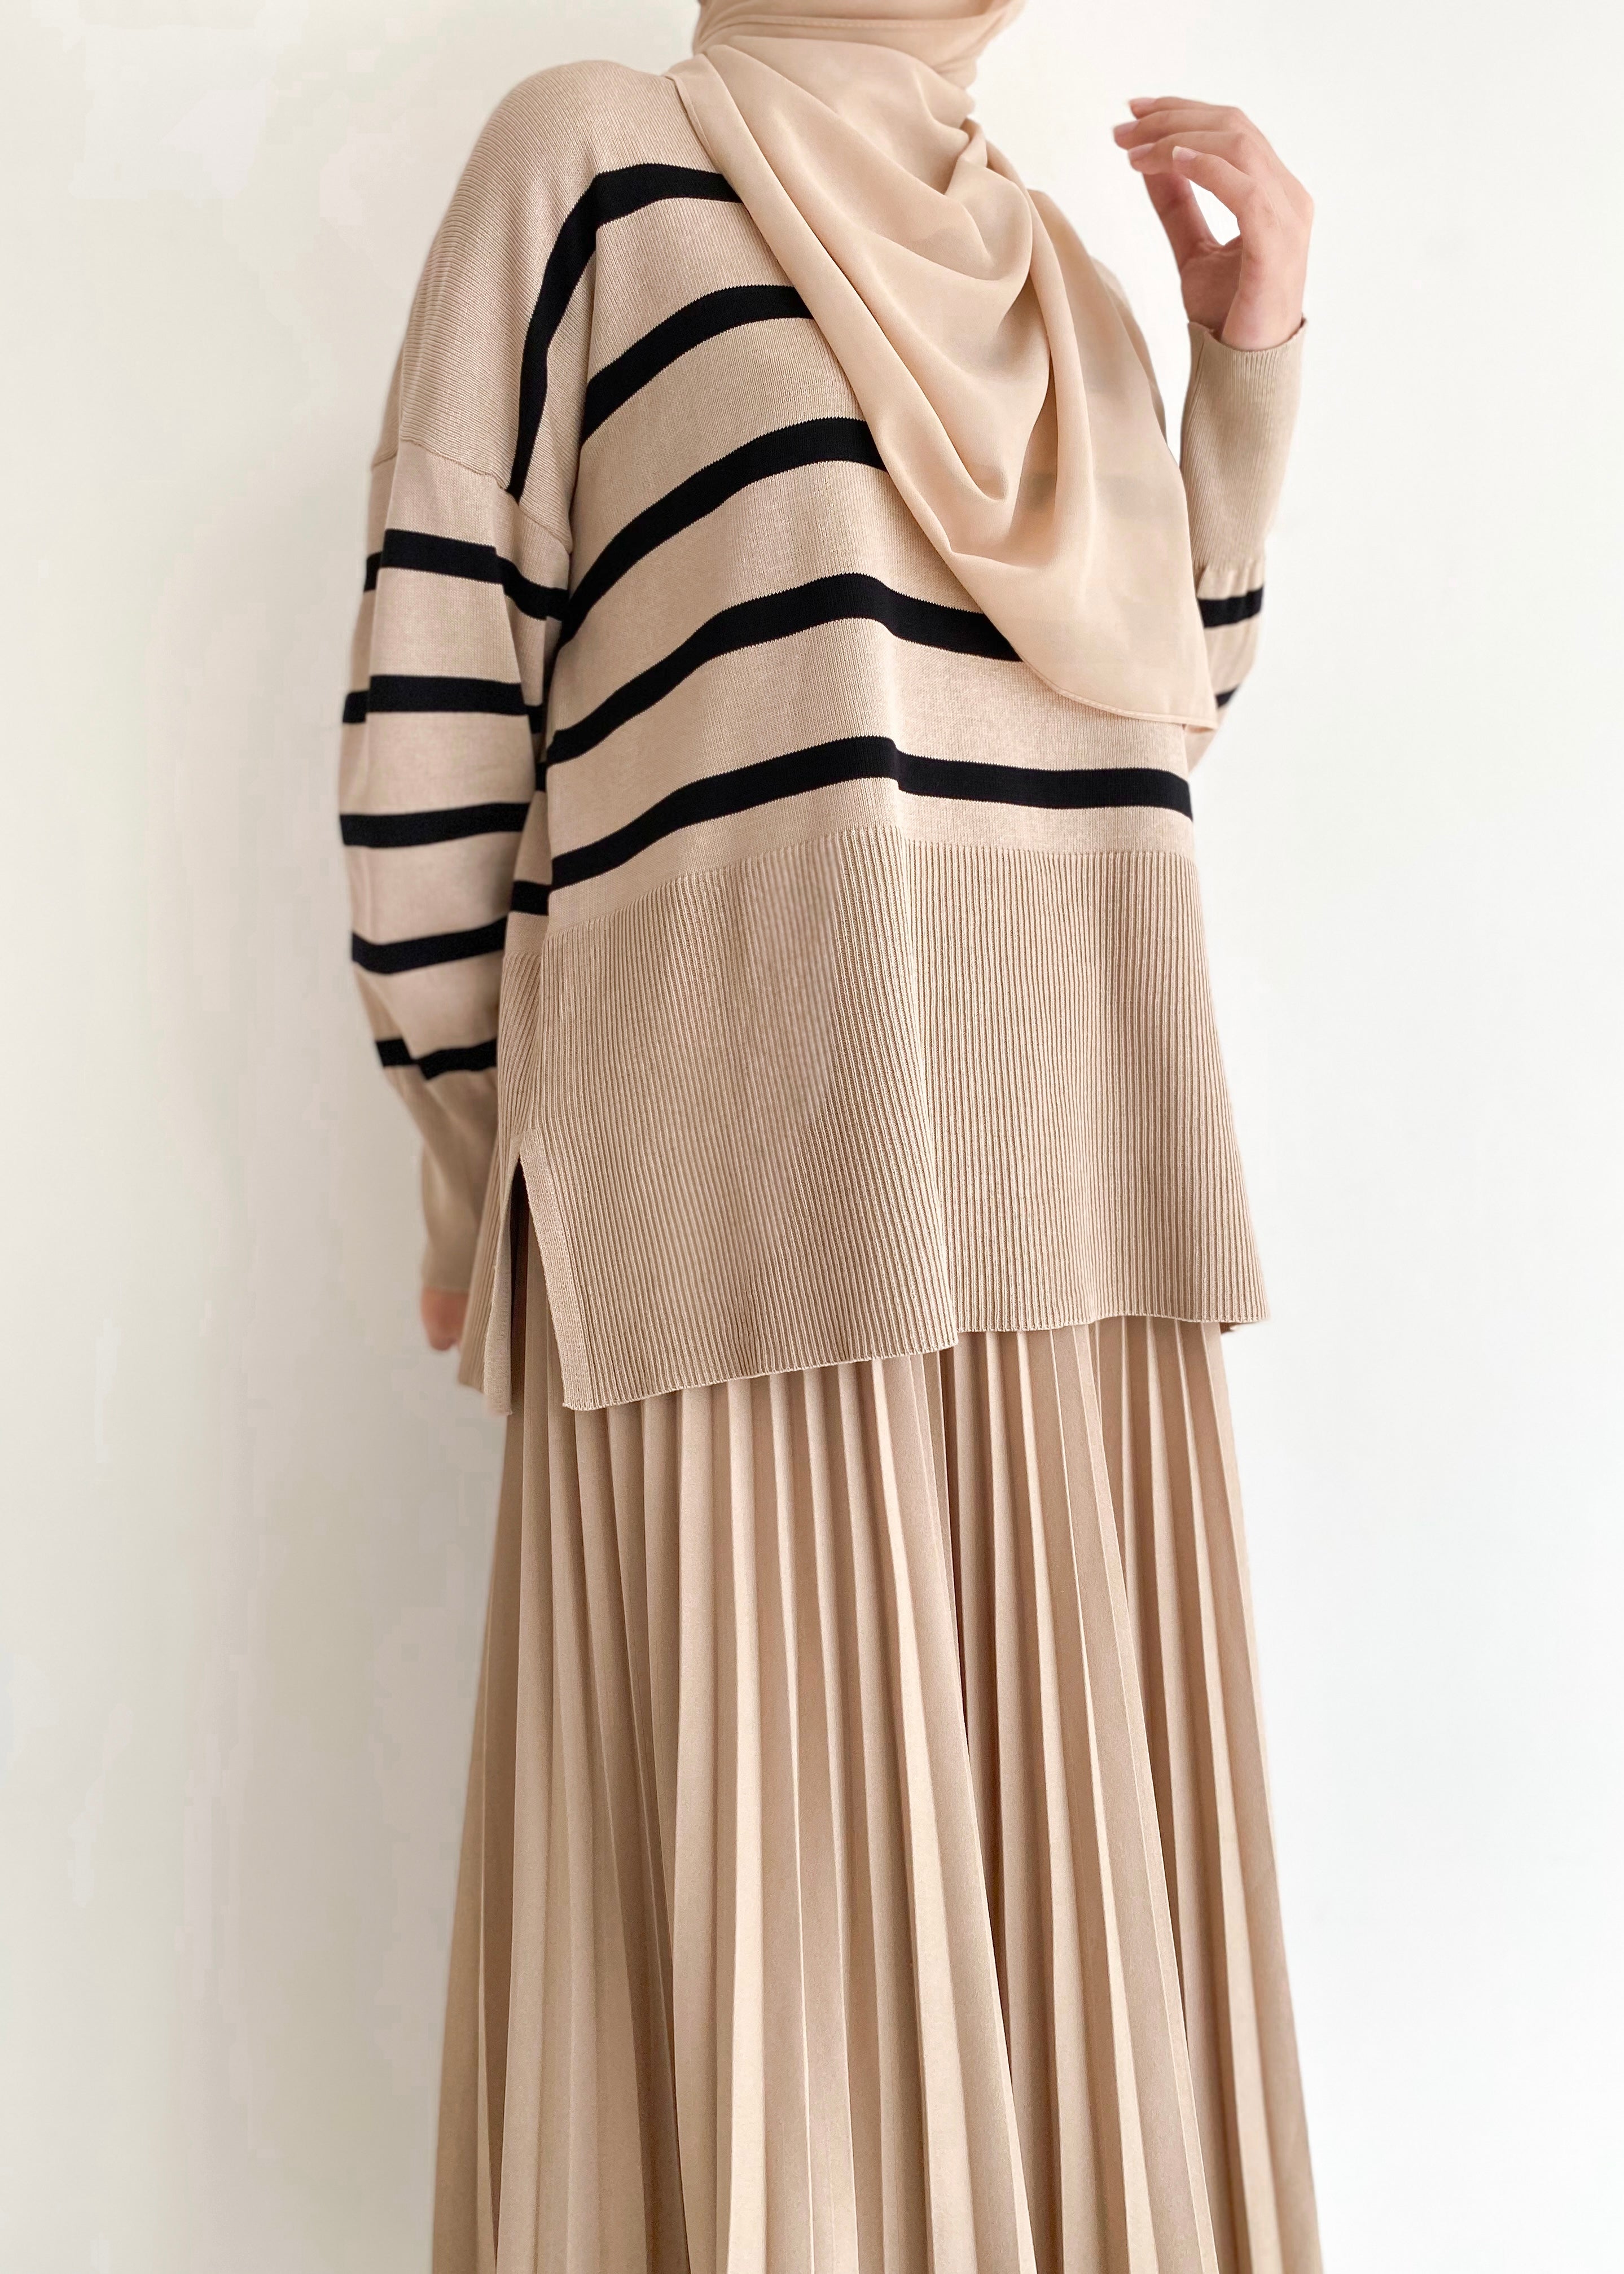 Evelyn Striped Top in Latte